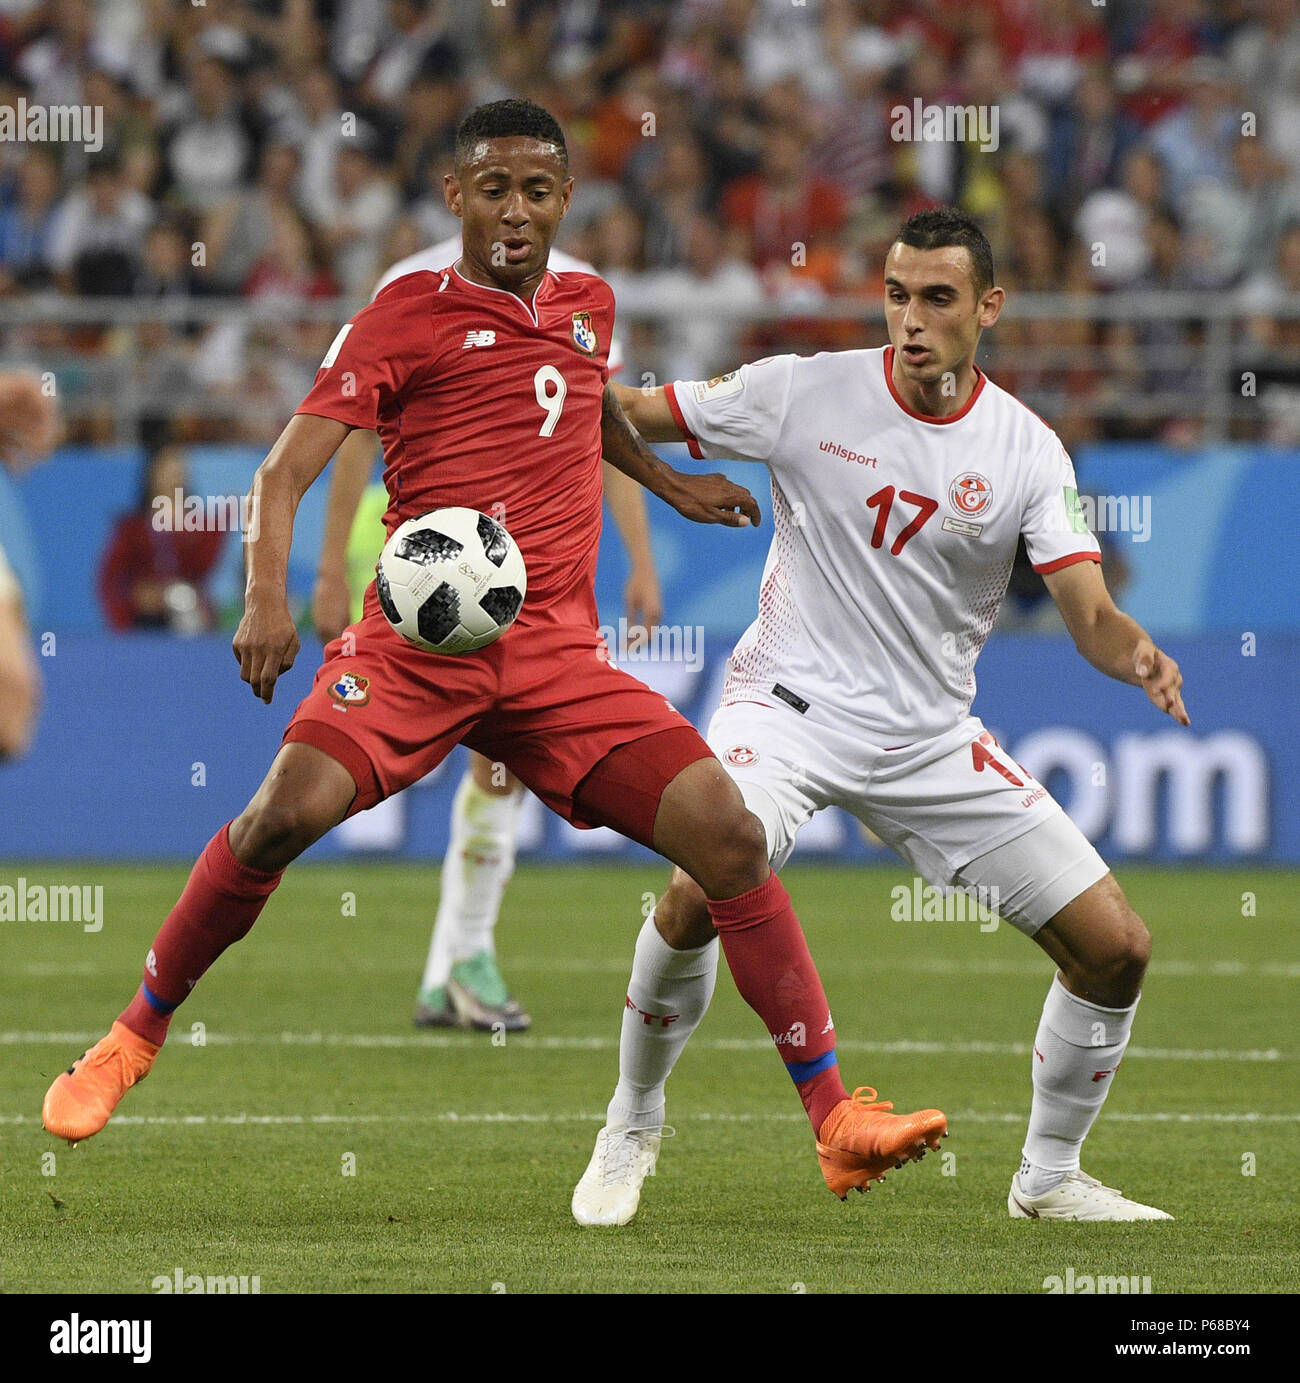 Saransk, Russia. 28th June, 2018. Gabriel Torres (L) of Panama vies with Ellyes Skhiri of Tunisia during the 2018 FIFA World Cup Group G match between Panama and Tunisia in Saransk, Russia, June 28, 2018. Credit: Lui Siu Wai/Xinhua/Alamy Live News Stock Photo